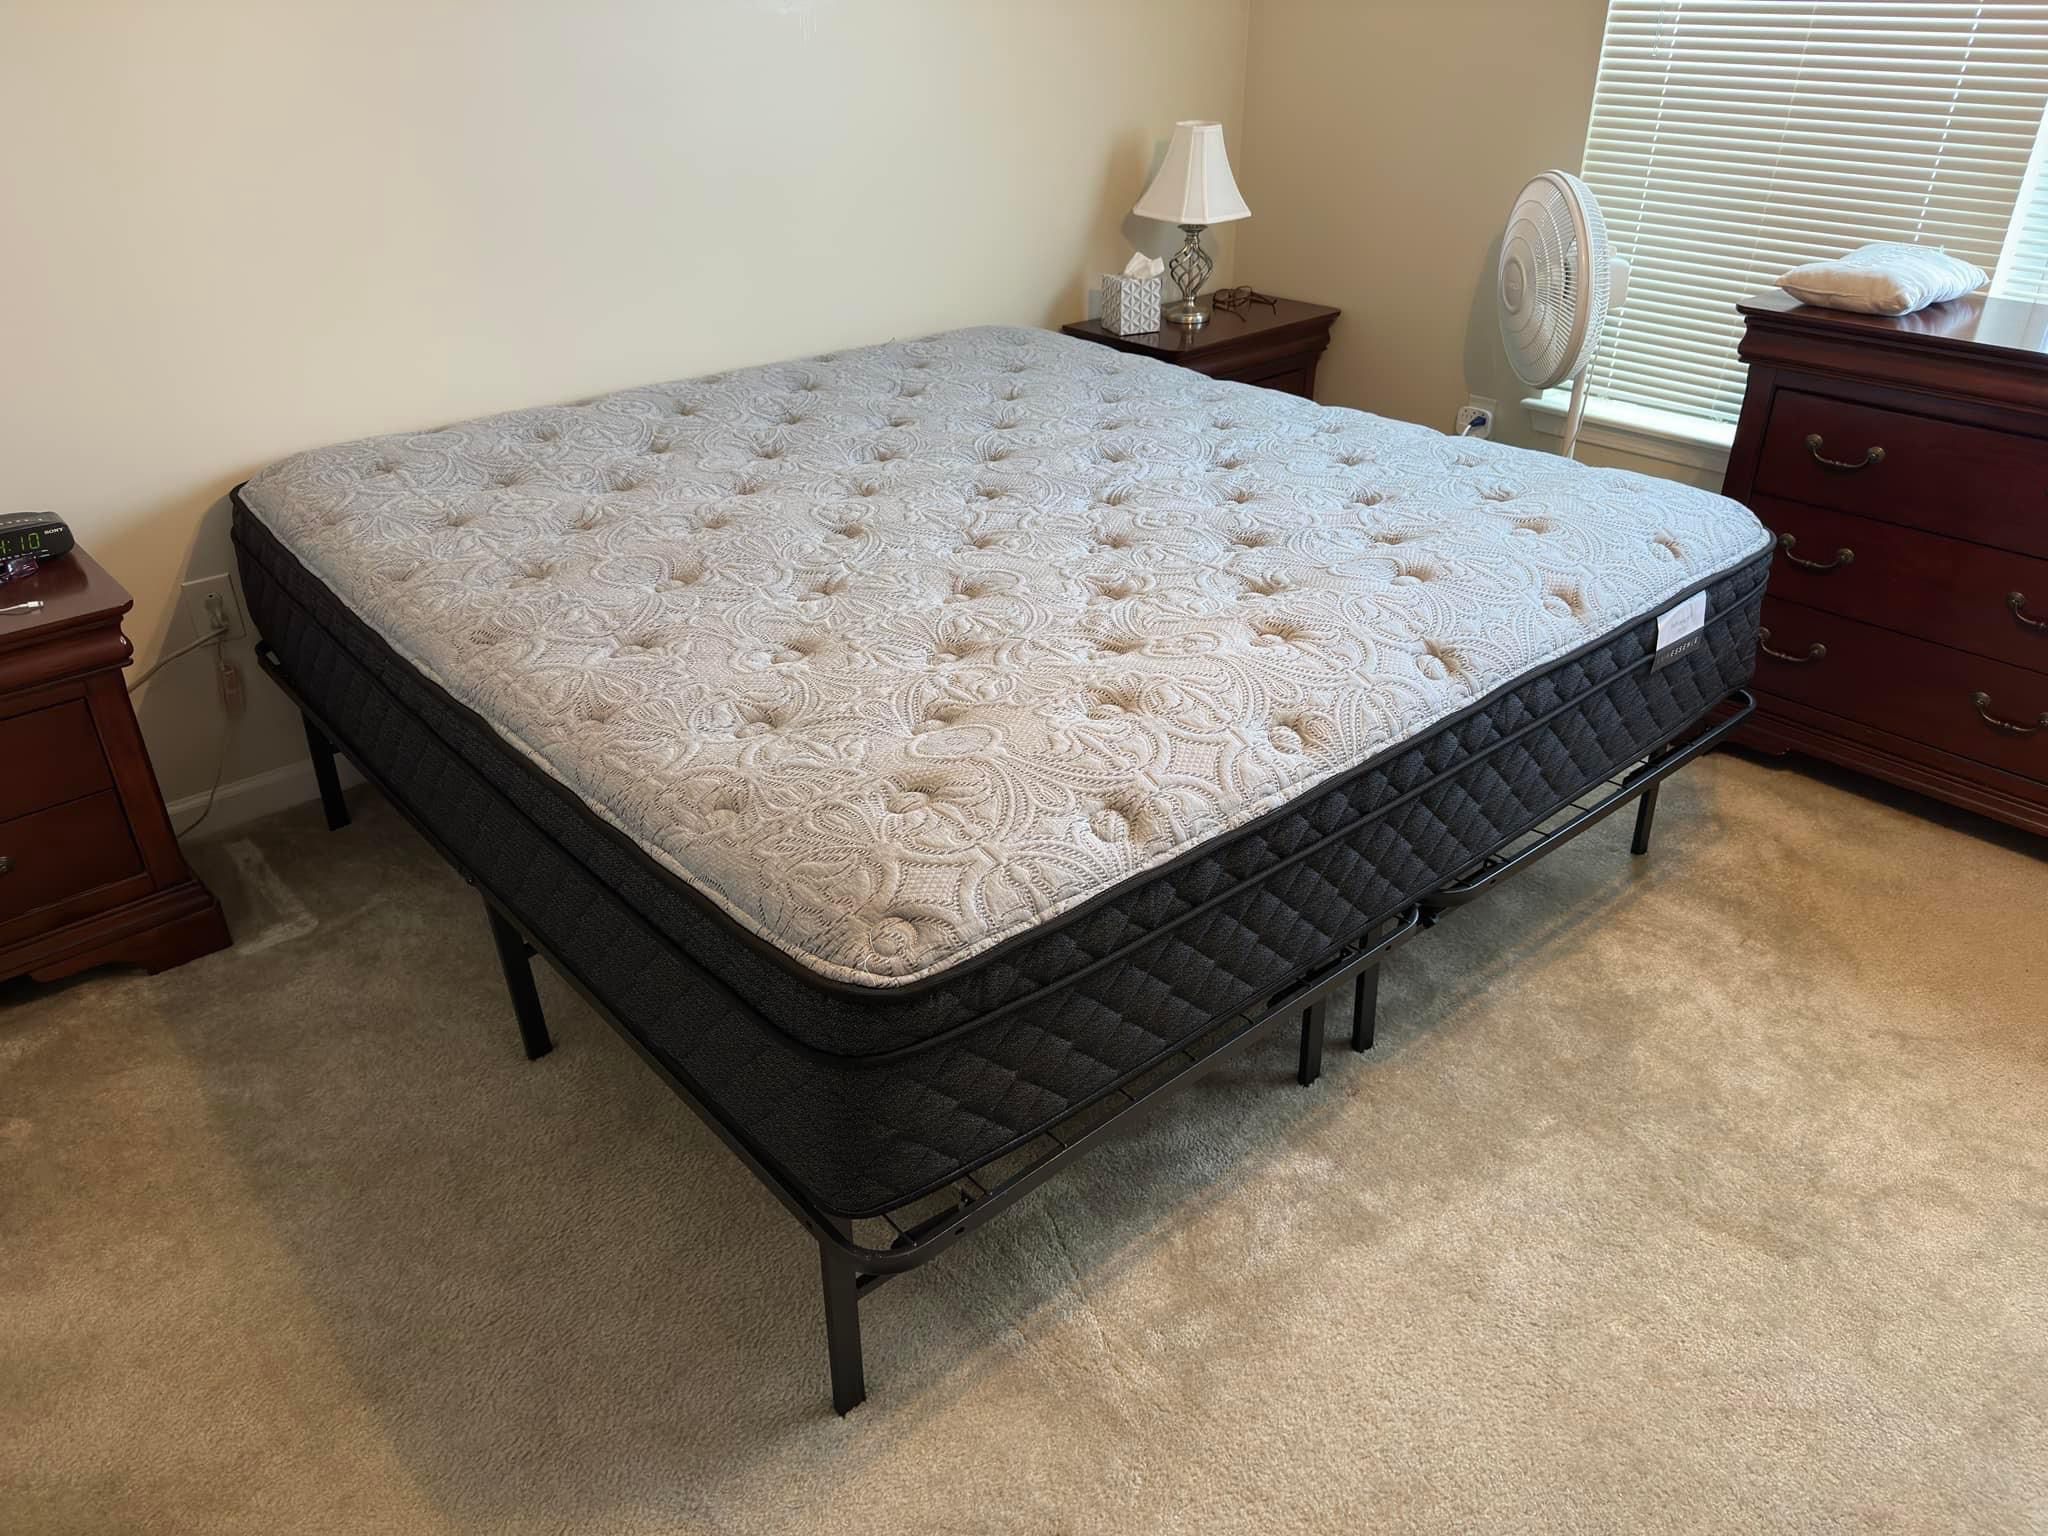 Replace your mattress TODAY and sleep on a new one tonight!